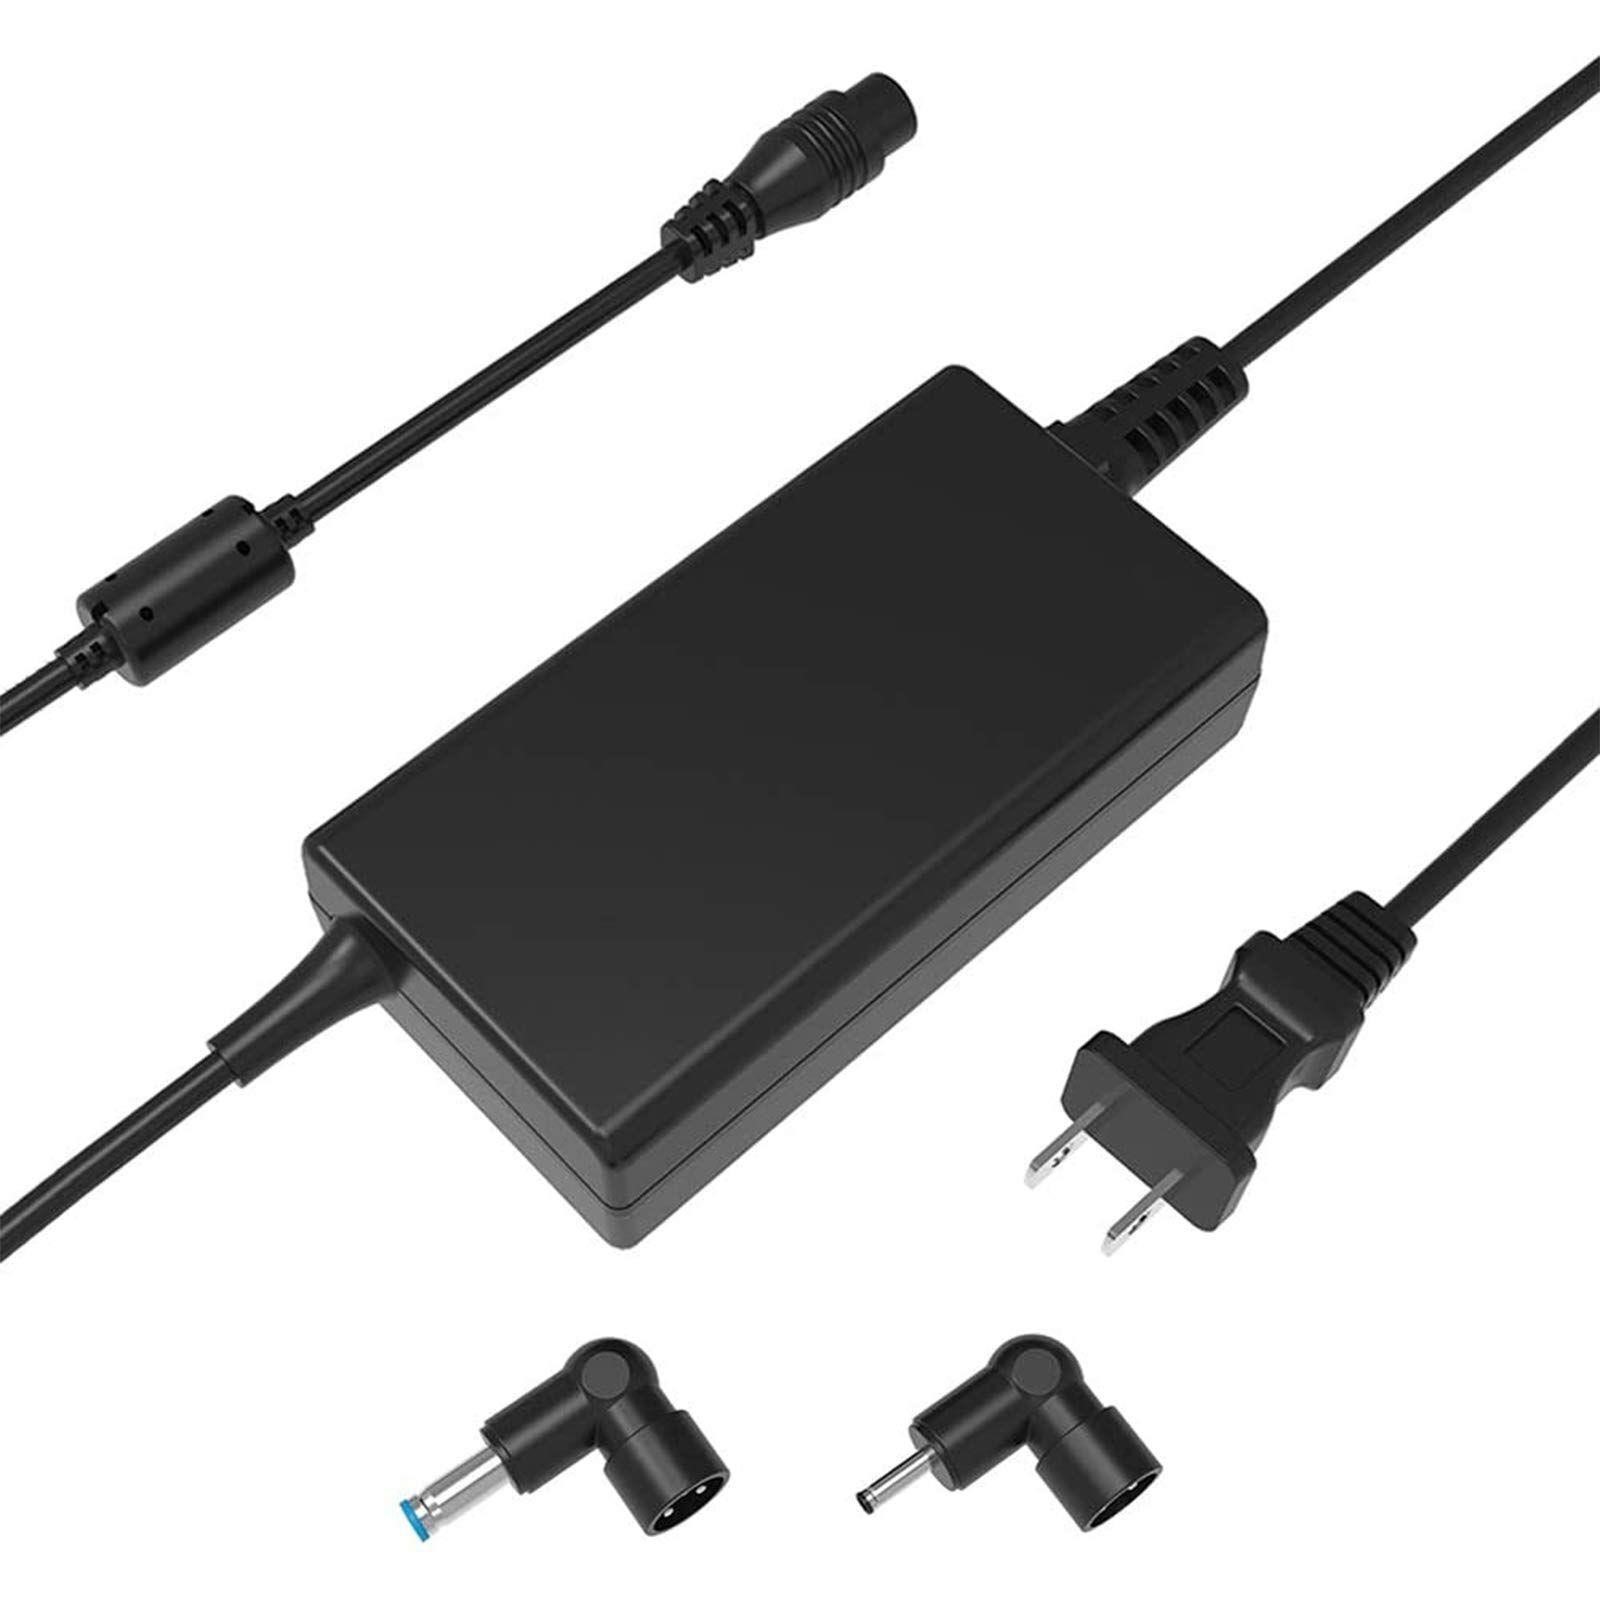 23$-acer power adapter two heads  m20 and m18